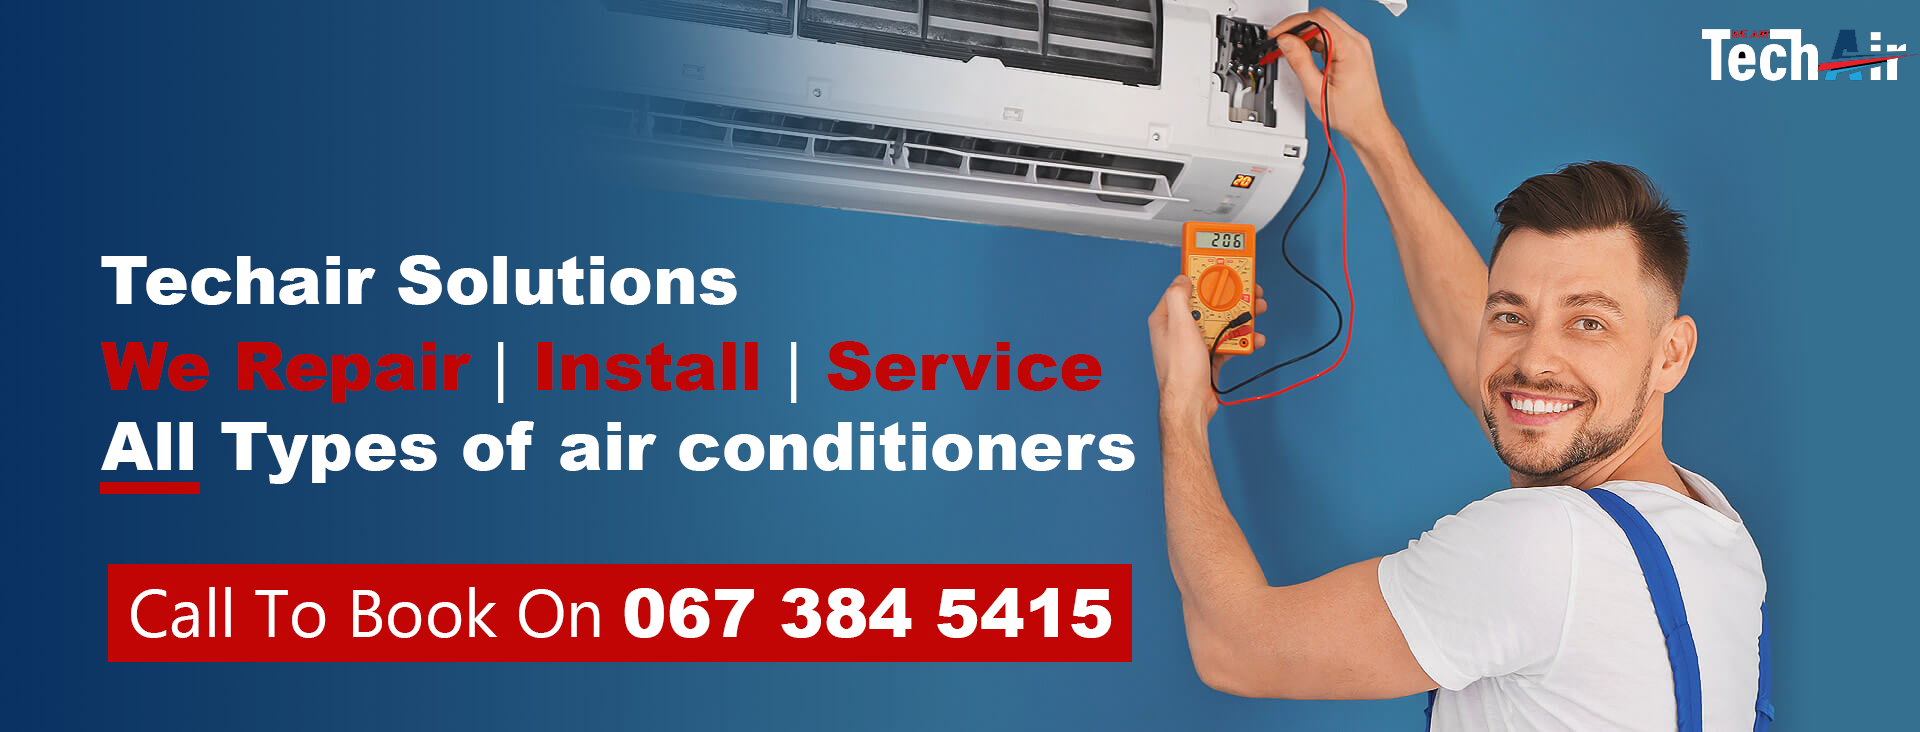 Midrand Air Conditioning Repairs and Installations